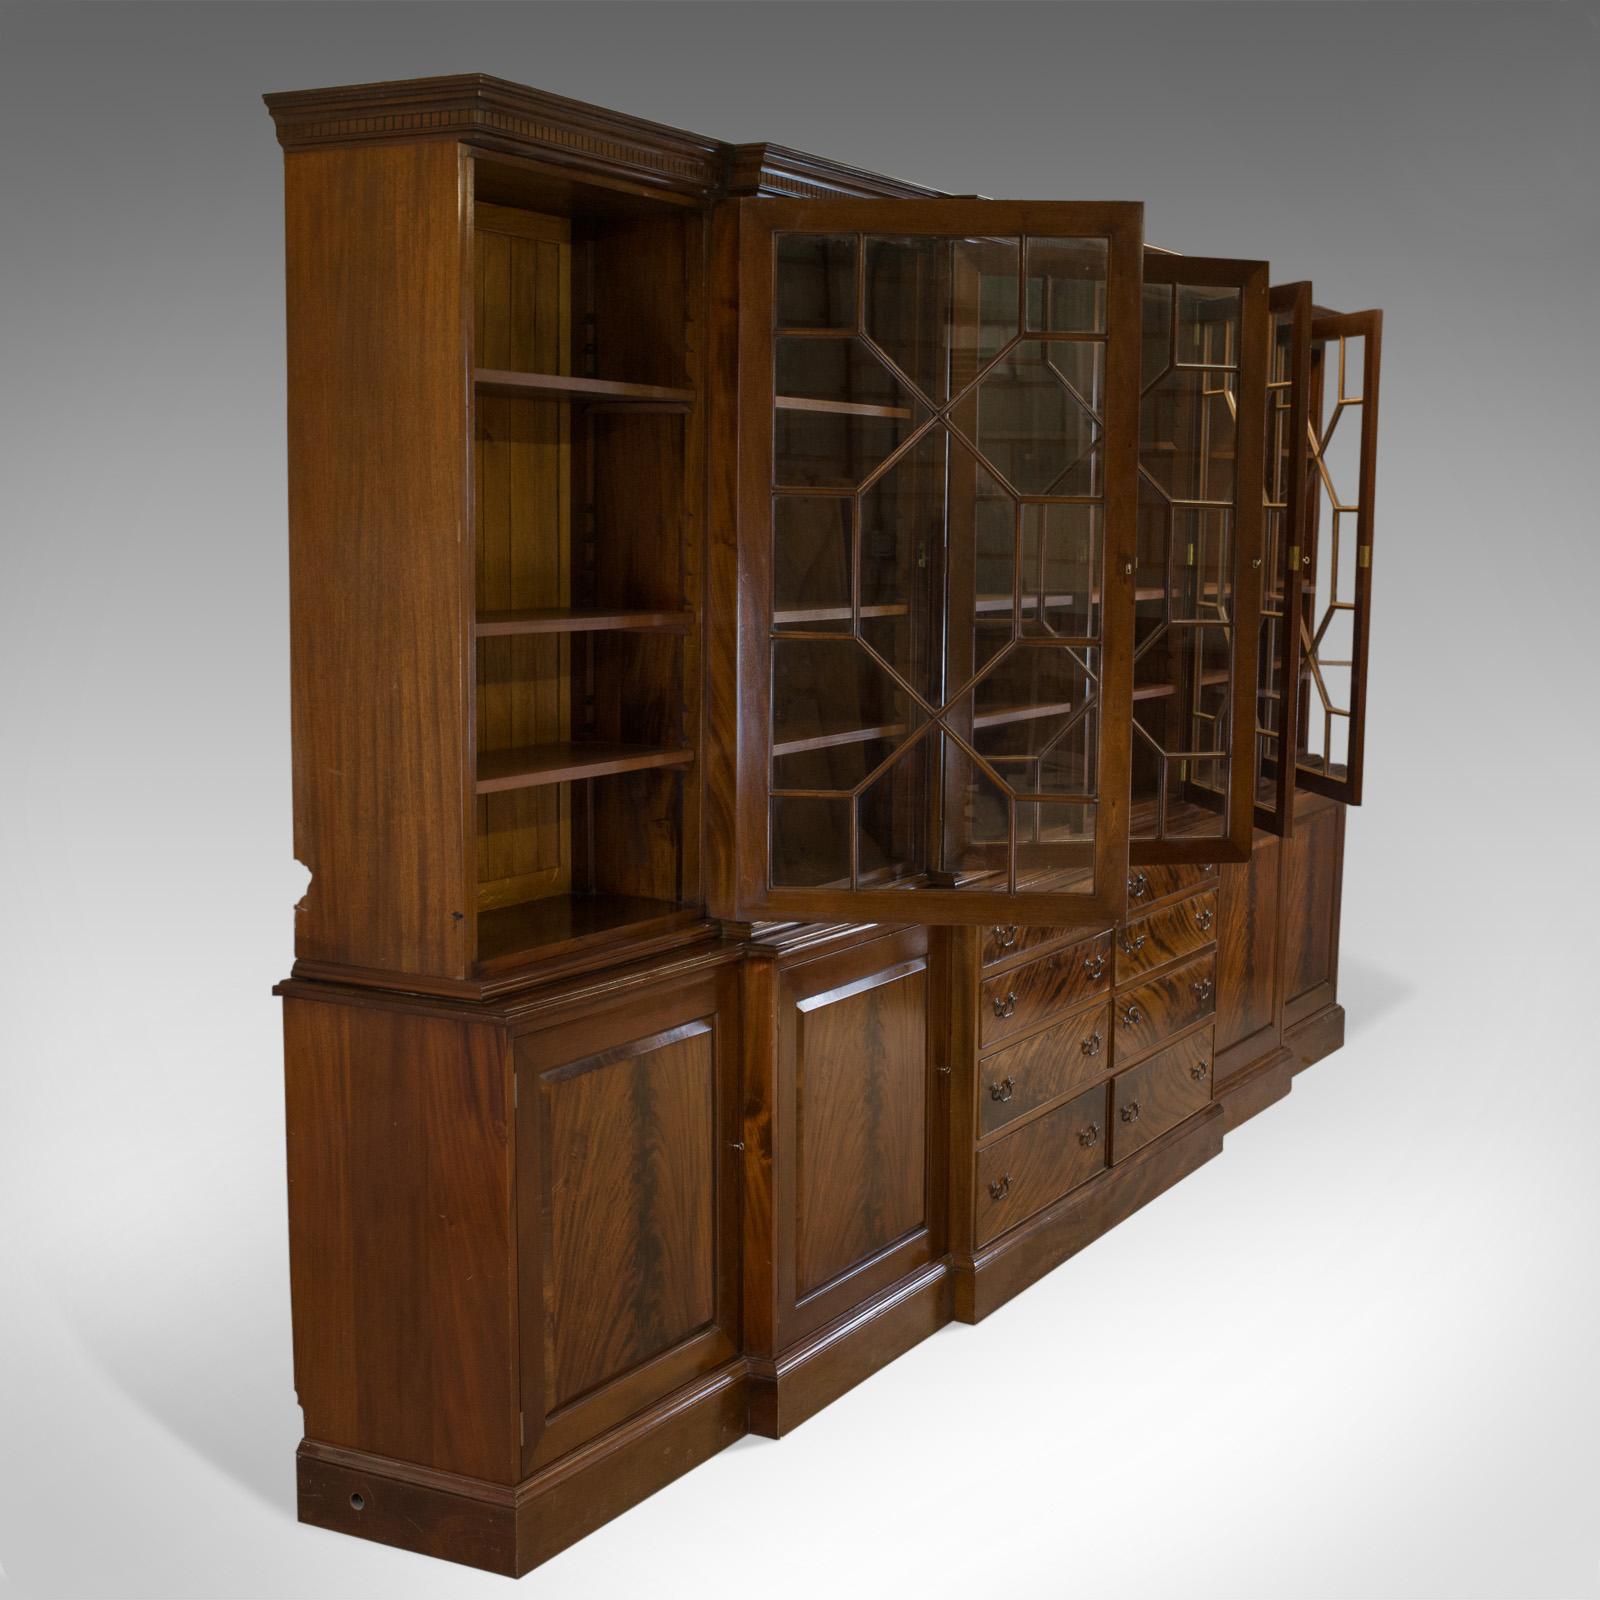 This is a large breakfront bookcase cabinet. A mahogany, glazed, Georgian revival, cabinet crafted in the late 20th century.

Impressive, large bookcase crafted in select mahogany
Good consistent colour throughout with a wax polished finish
In